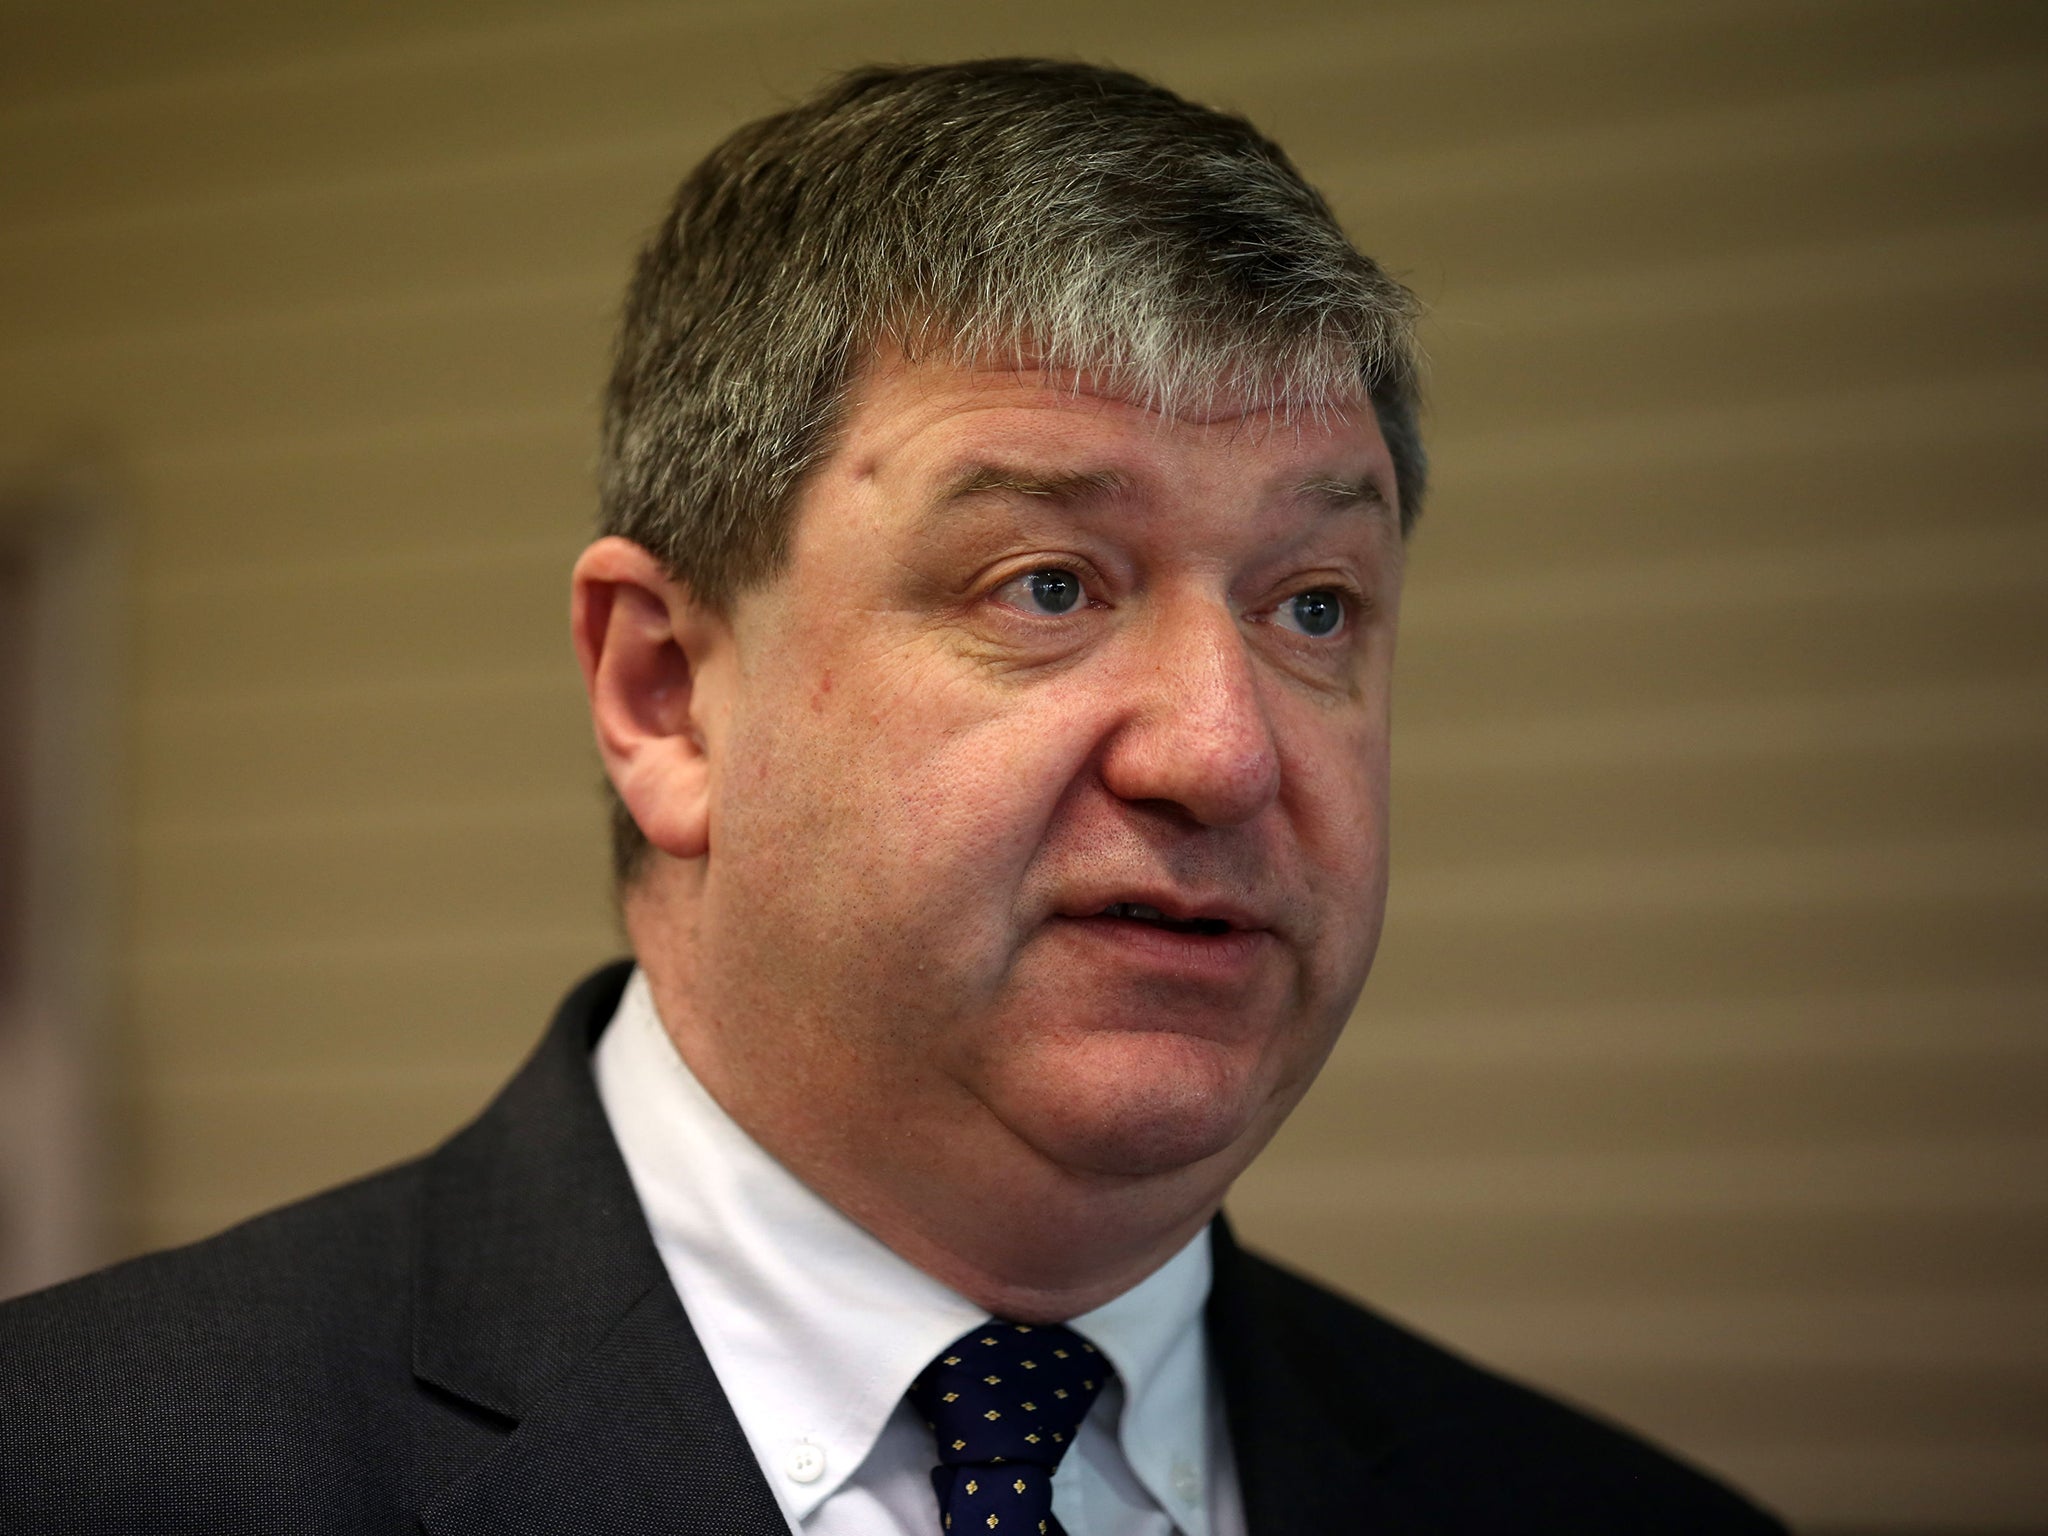 Four of Mr Carmichael's constituents raised more than £170,000 to fund their legal action